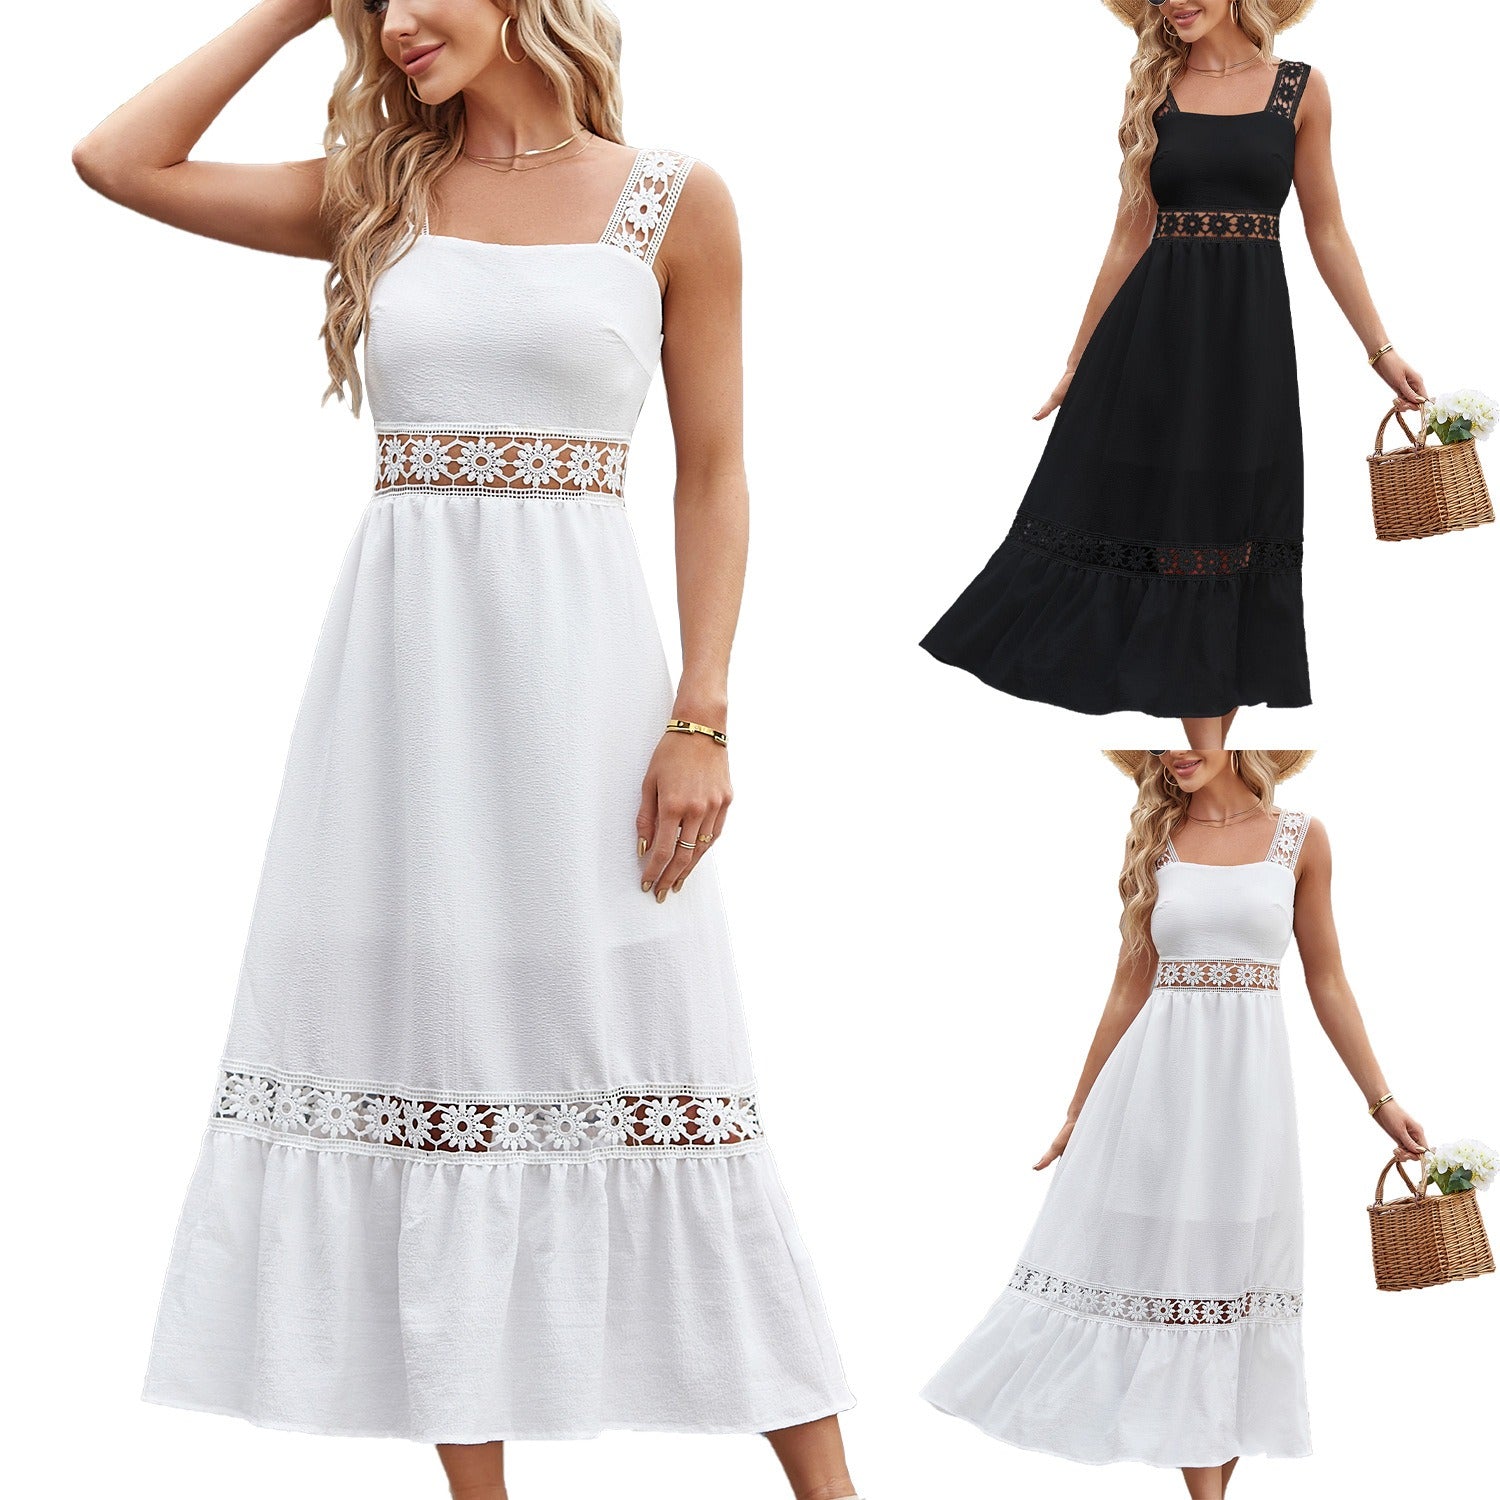 Solid Color Lace Spliced Square Neck Sleeveless Strap Dress